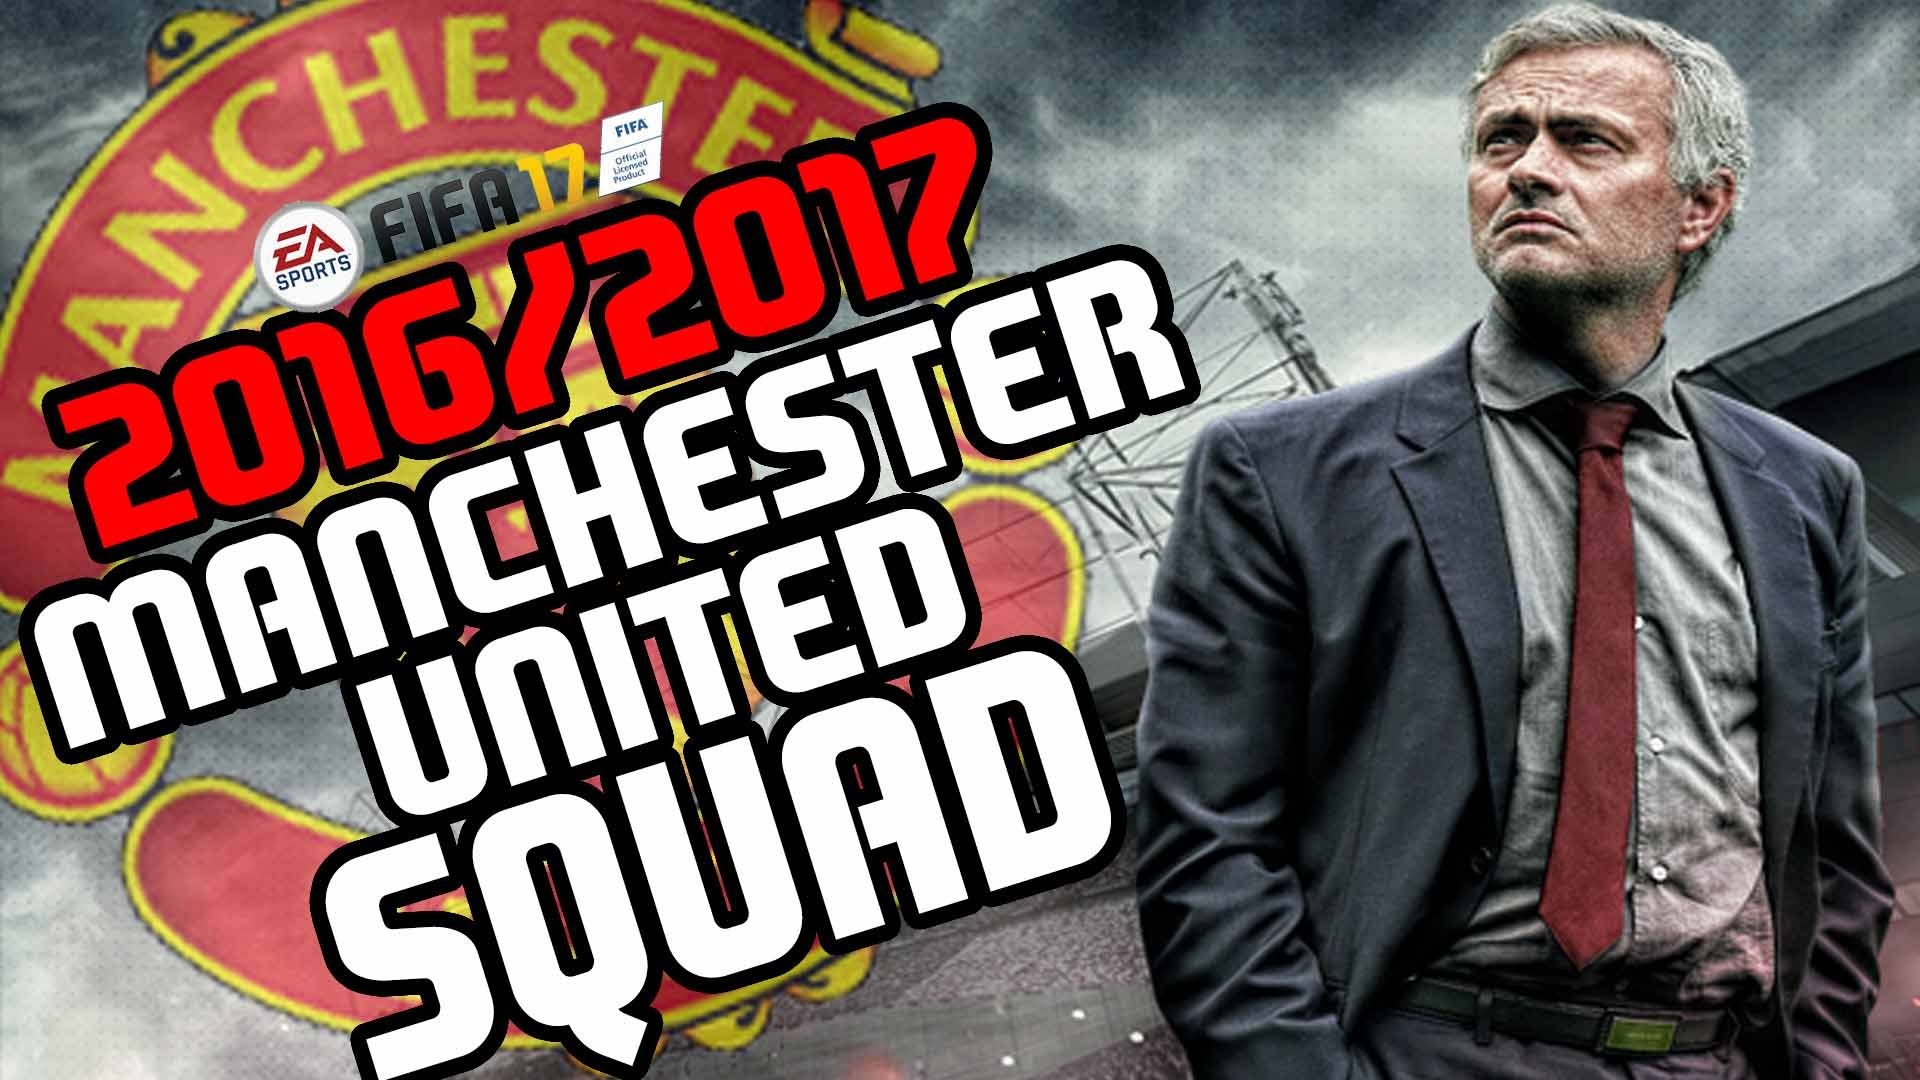 1920x1080 2016/2017 MANCHESTER UNITED SQUAD! TRANSFER RUMOURS AND CONFIRMED TRANSFERS  SQUAD! MAN UTD POGBA! - YouTube